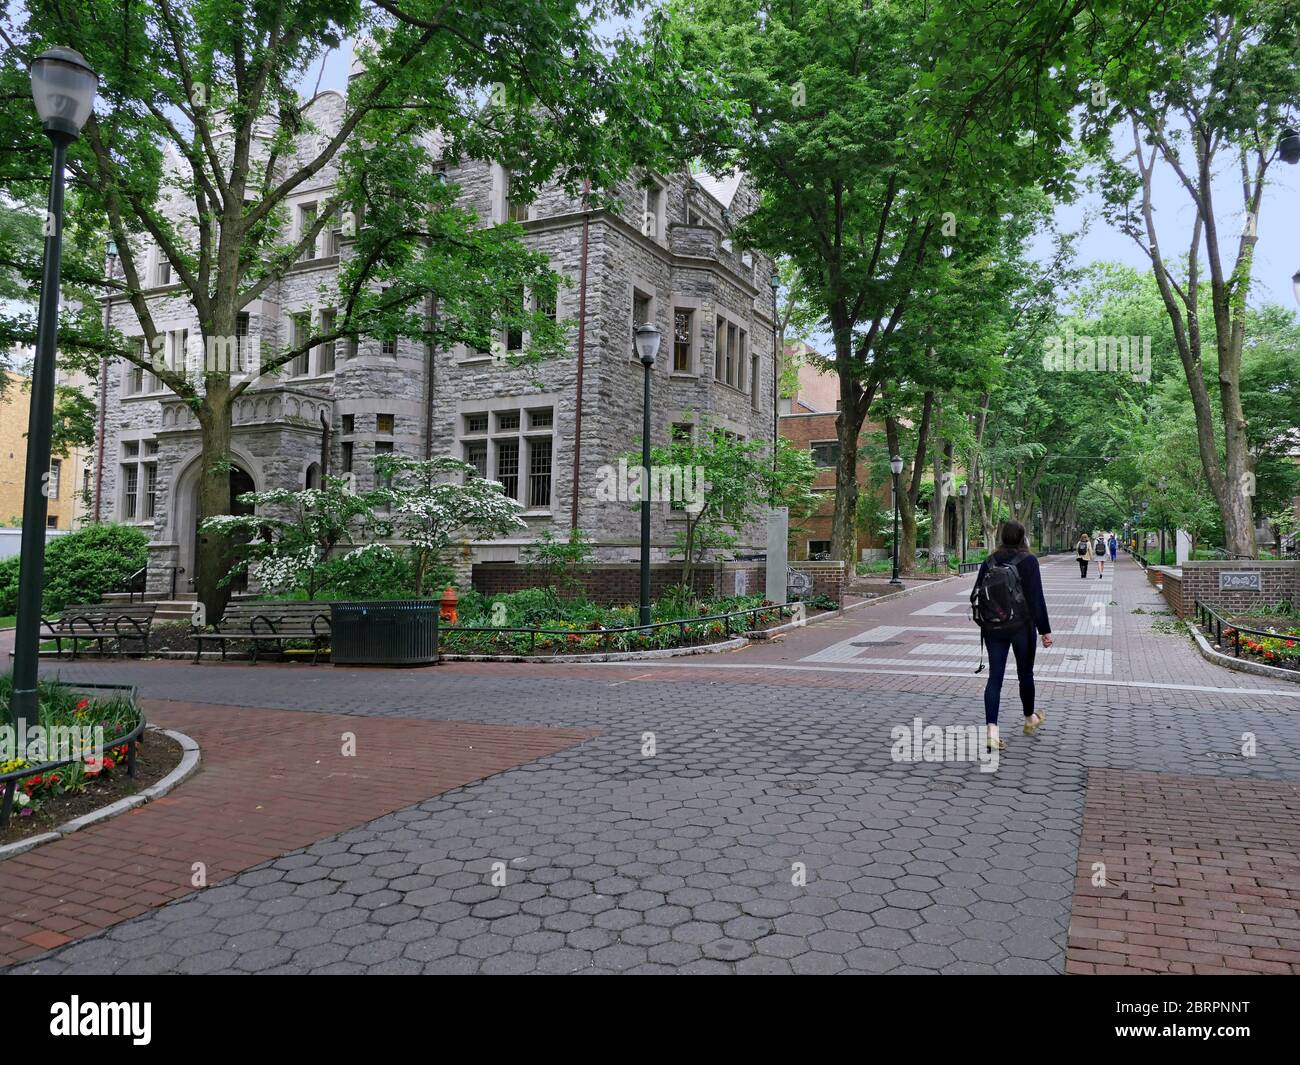 The University of Pennsylvania campus is very green and shady, as seen in this view along Locust Walk. Stock Photo